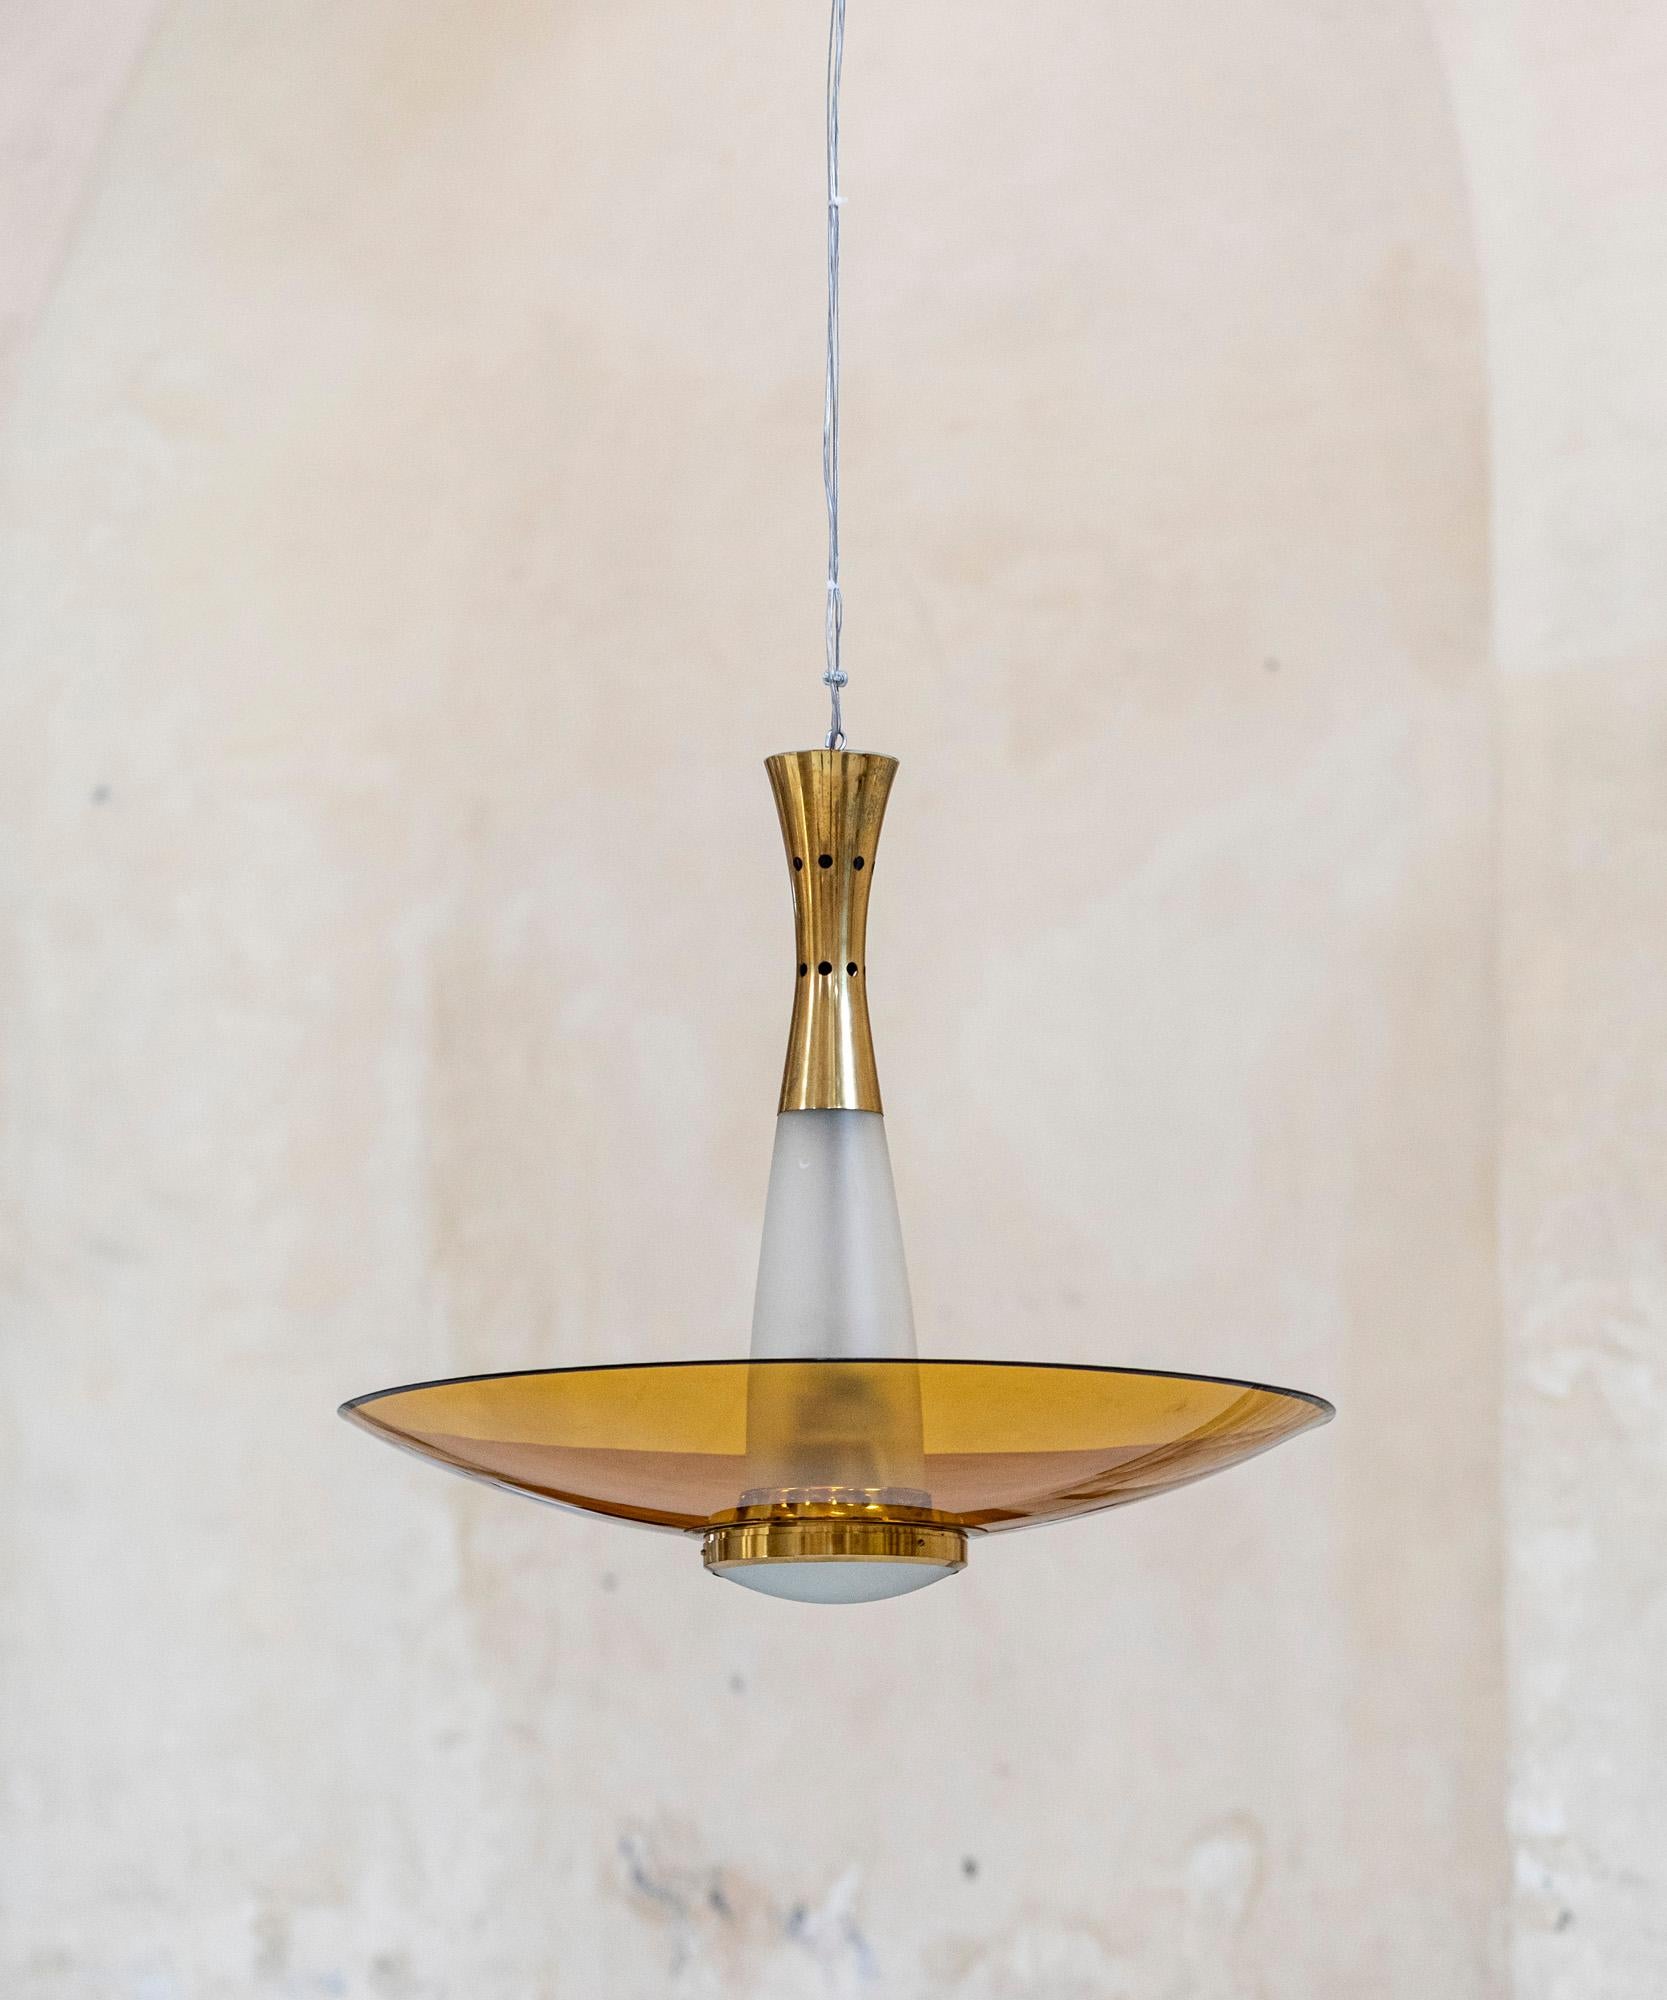 This suspension lamp design was prominently displayed in the article on Mobilier et Decoration in 1959, featuring and endorsing the lighting designs of Max ingrand.
From a small series of lamps, sconces and ceiling fixtures featuring
luminous